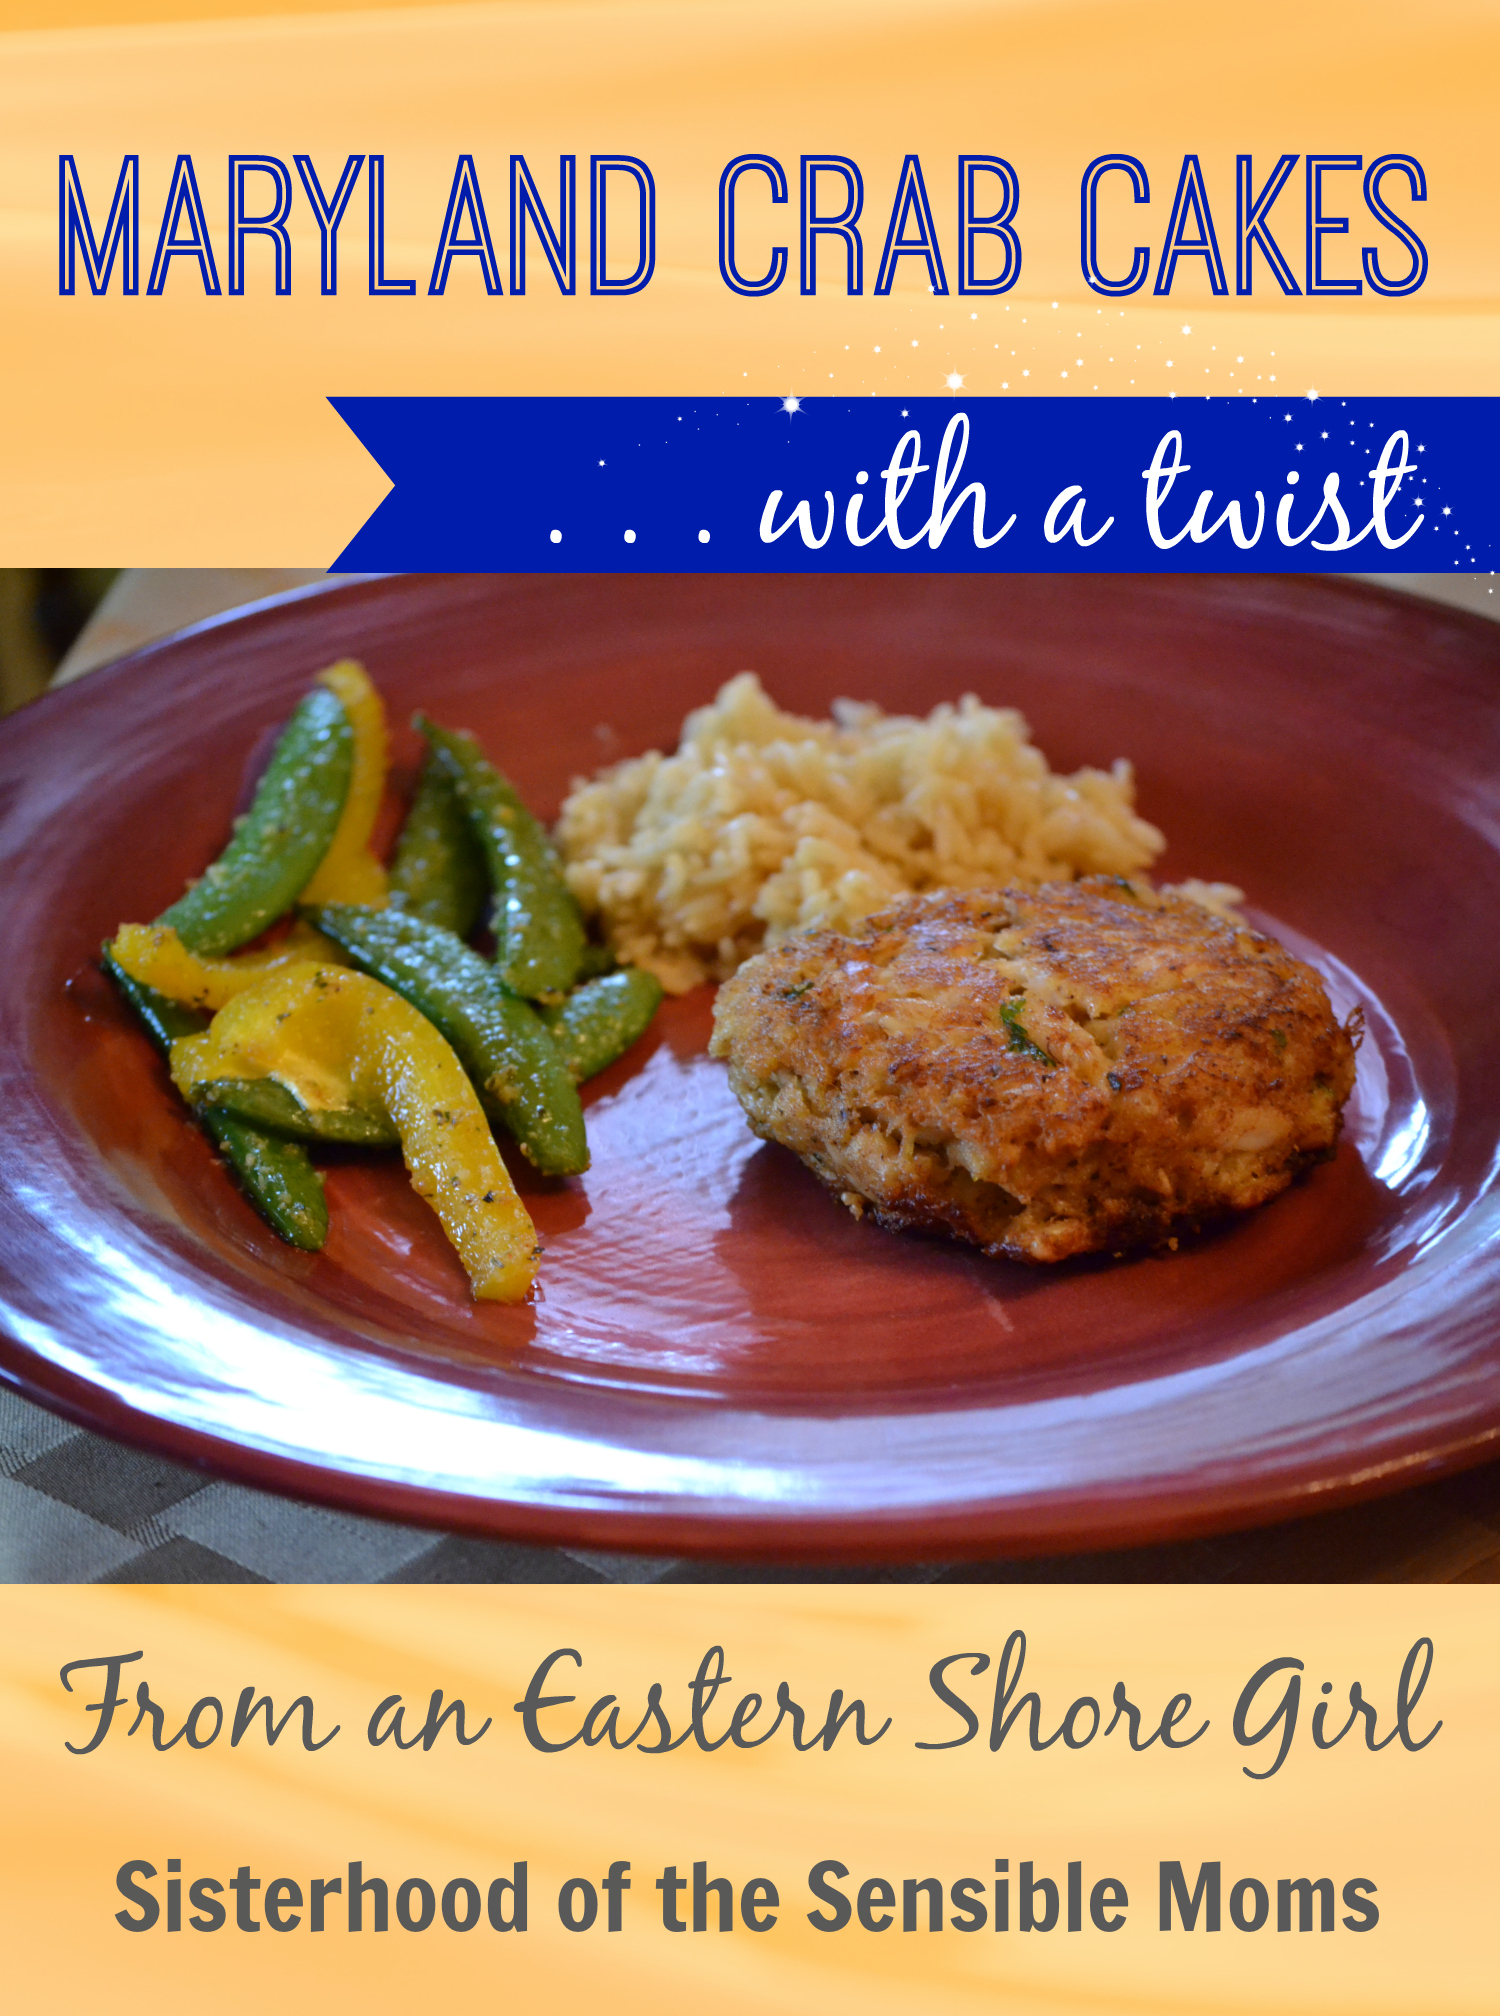 Maryland Crab Cakes with a Twist from an Eastern Shore Girl - Sisterhood of the Sensible Moms